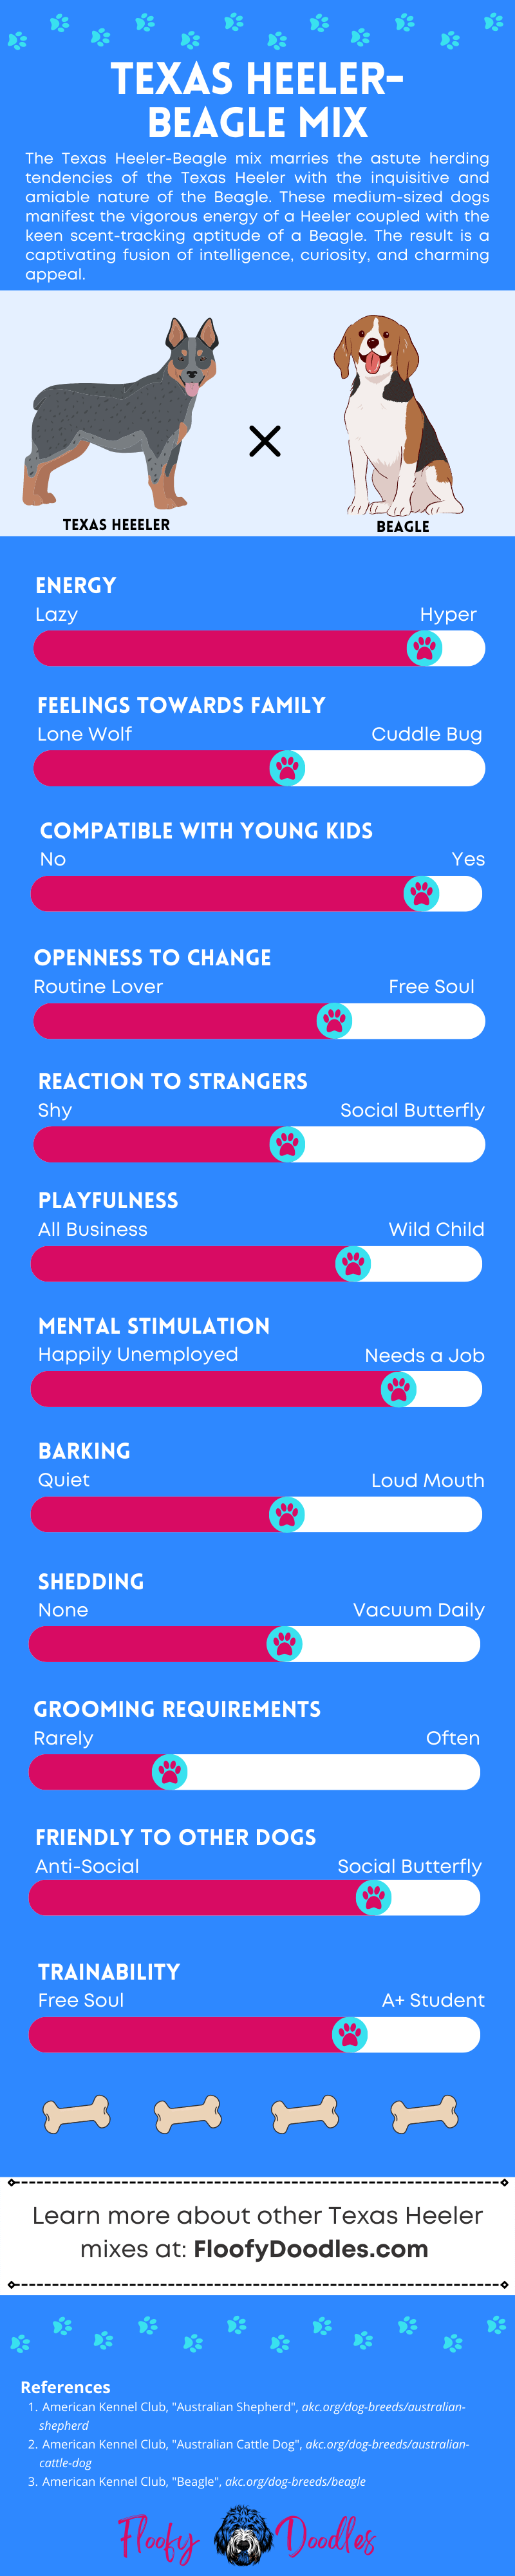 Electric blue and dark red infographic showing the different traits and characteristics of the Texas Heeler-Beagle mix.